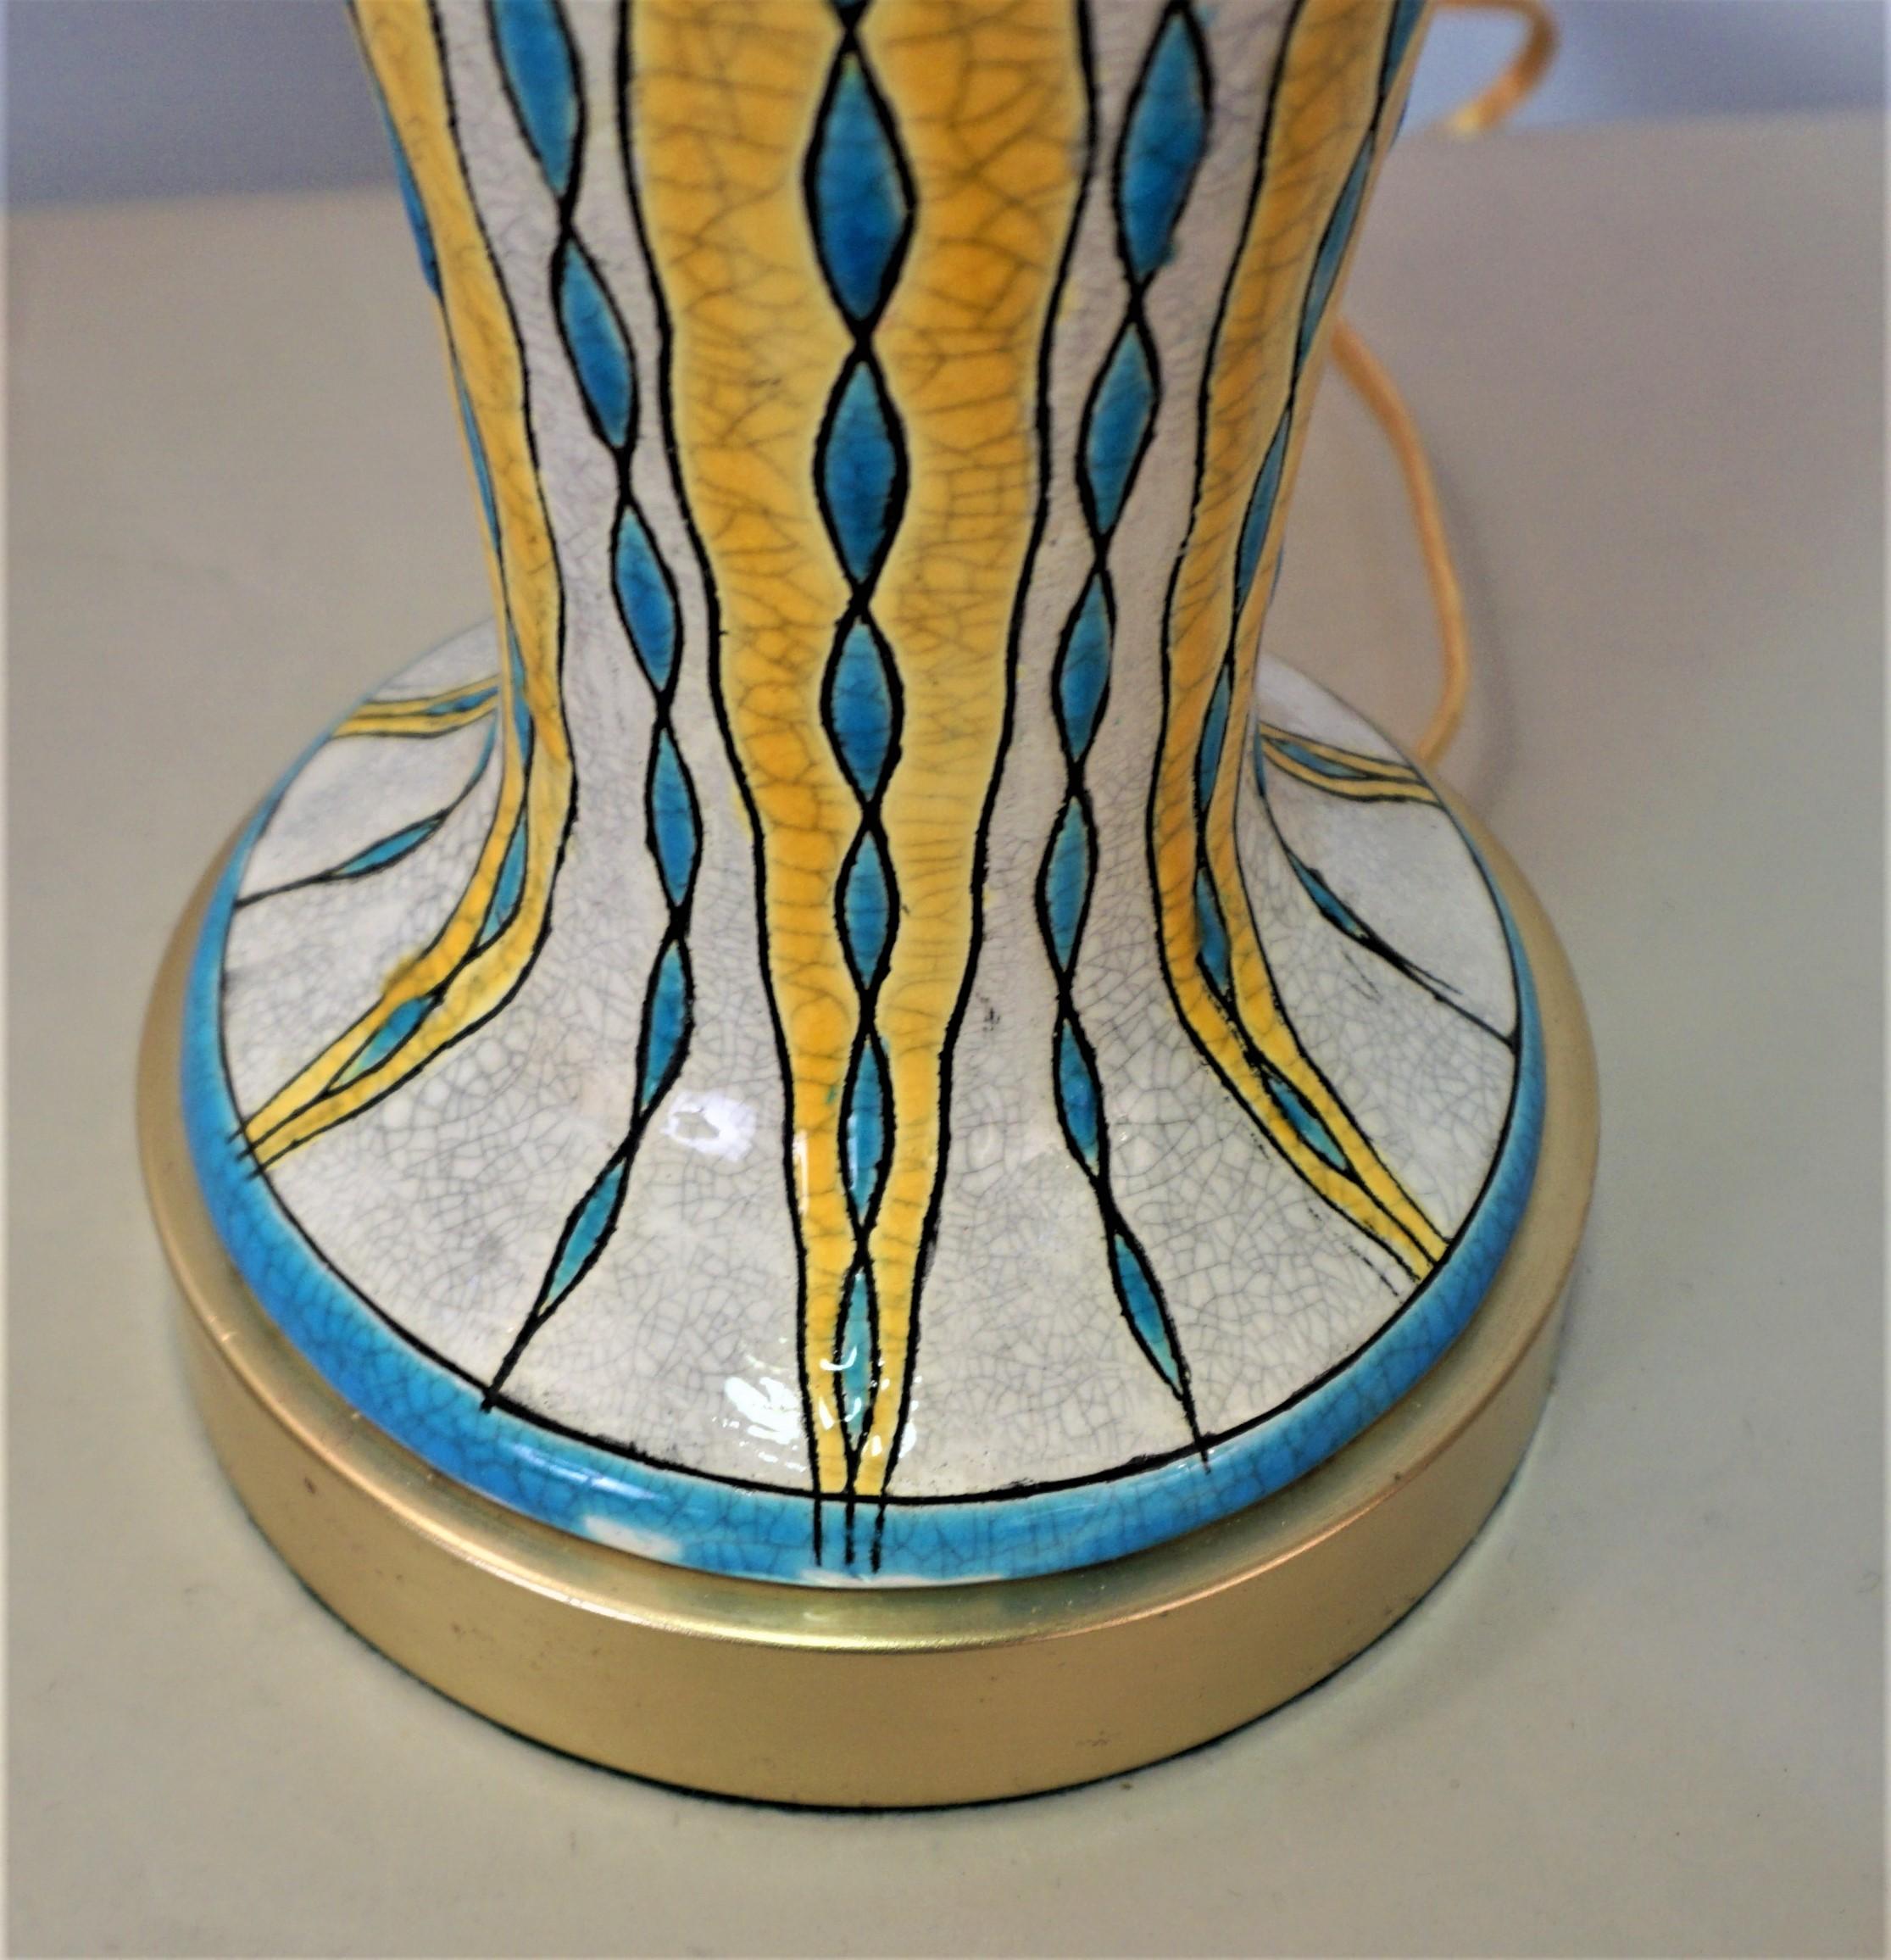 Early 20th Century Pair of Electrified Lamps Keramis Art Deco vase by Charles Catteau for Boch